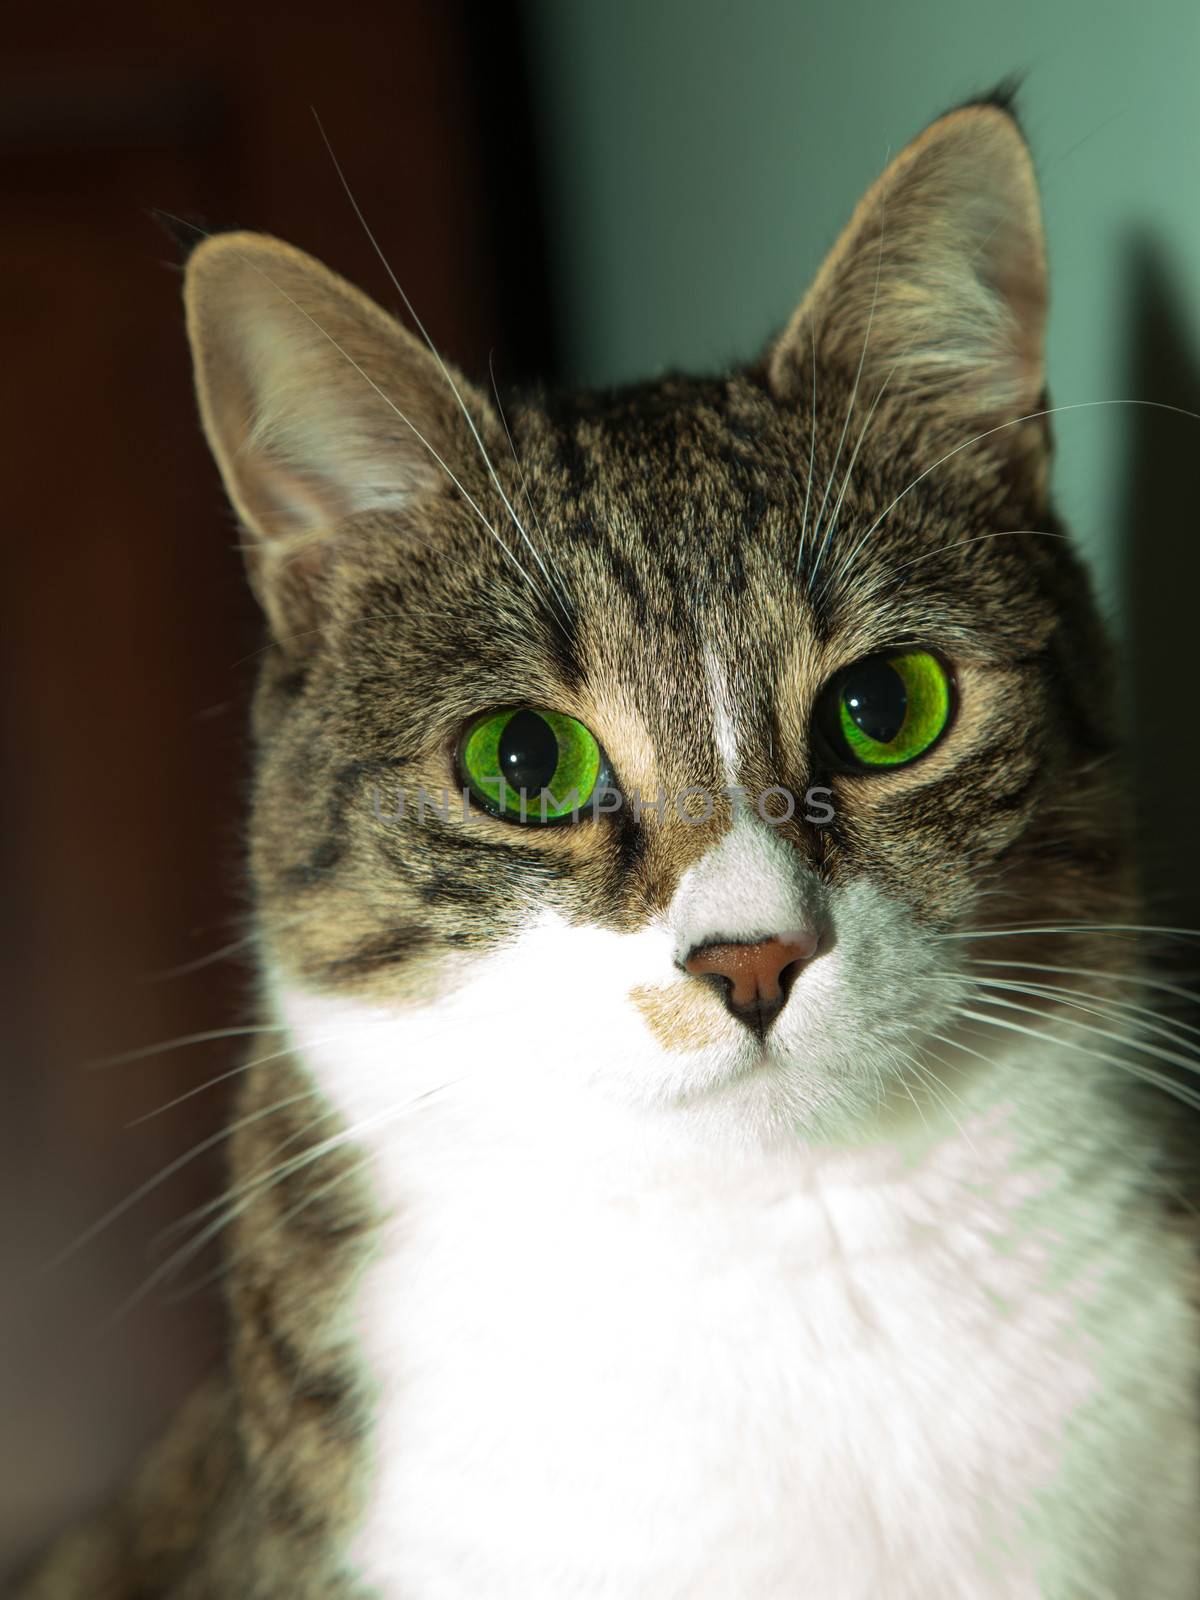 Green-eyed cat, close up of face